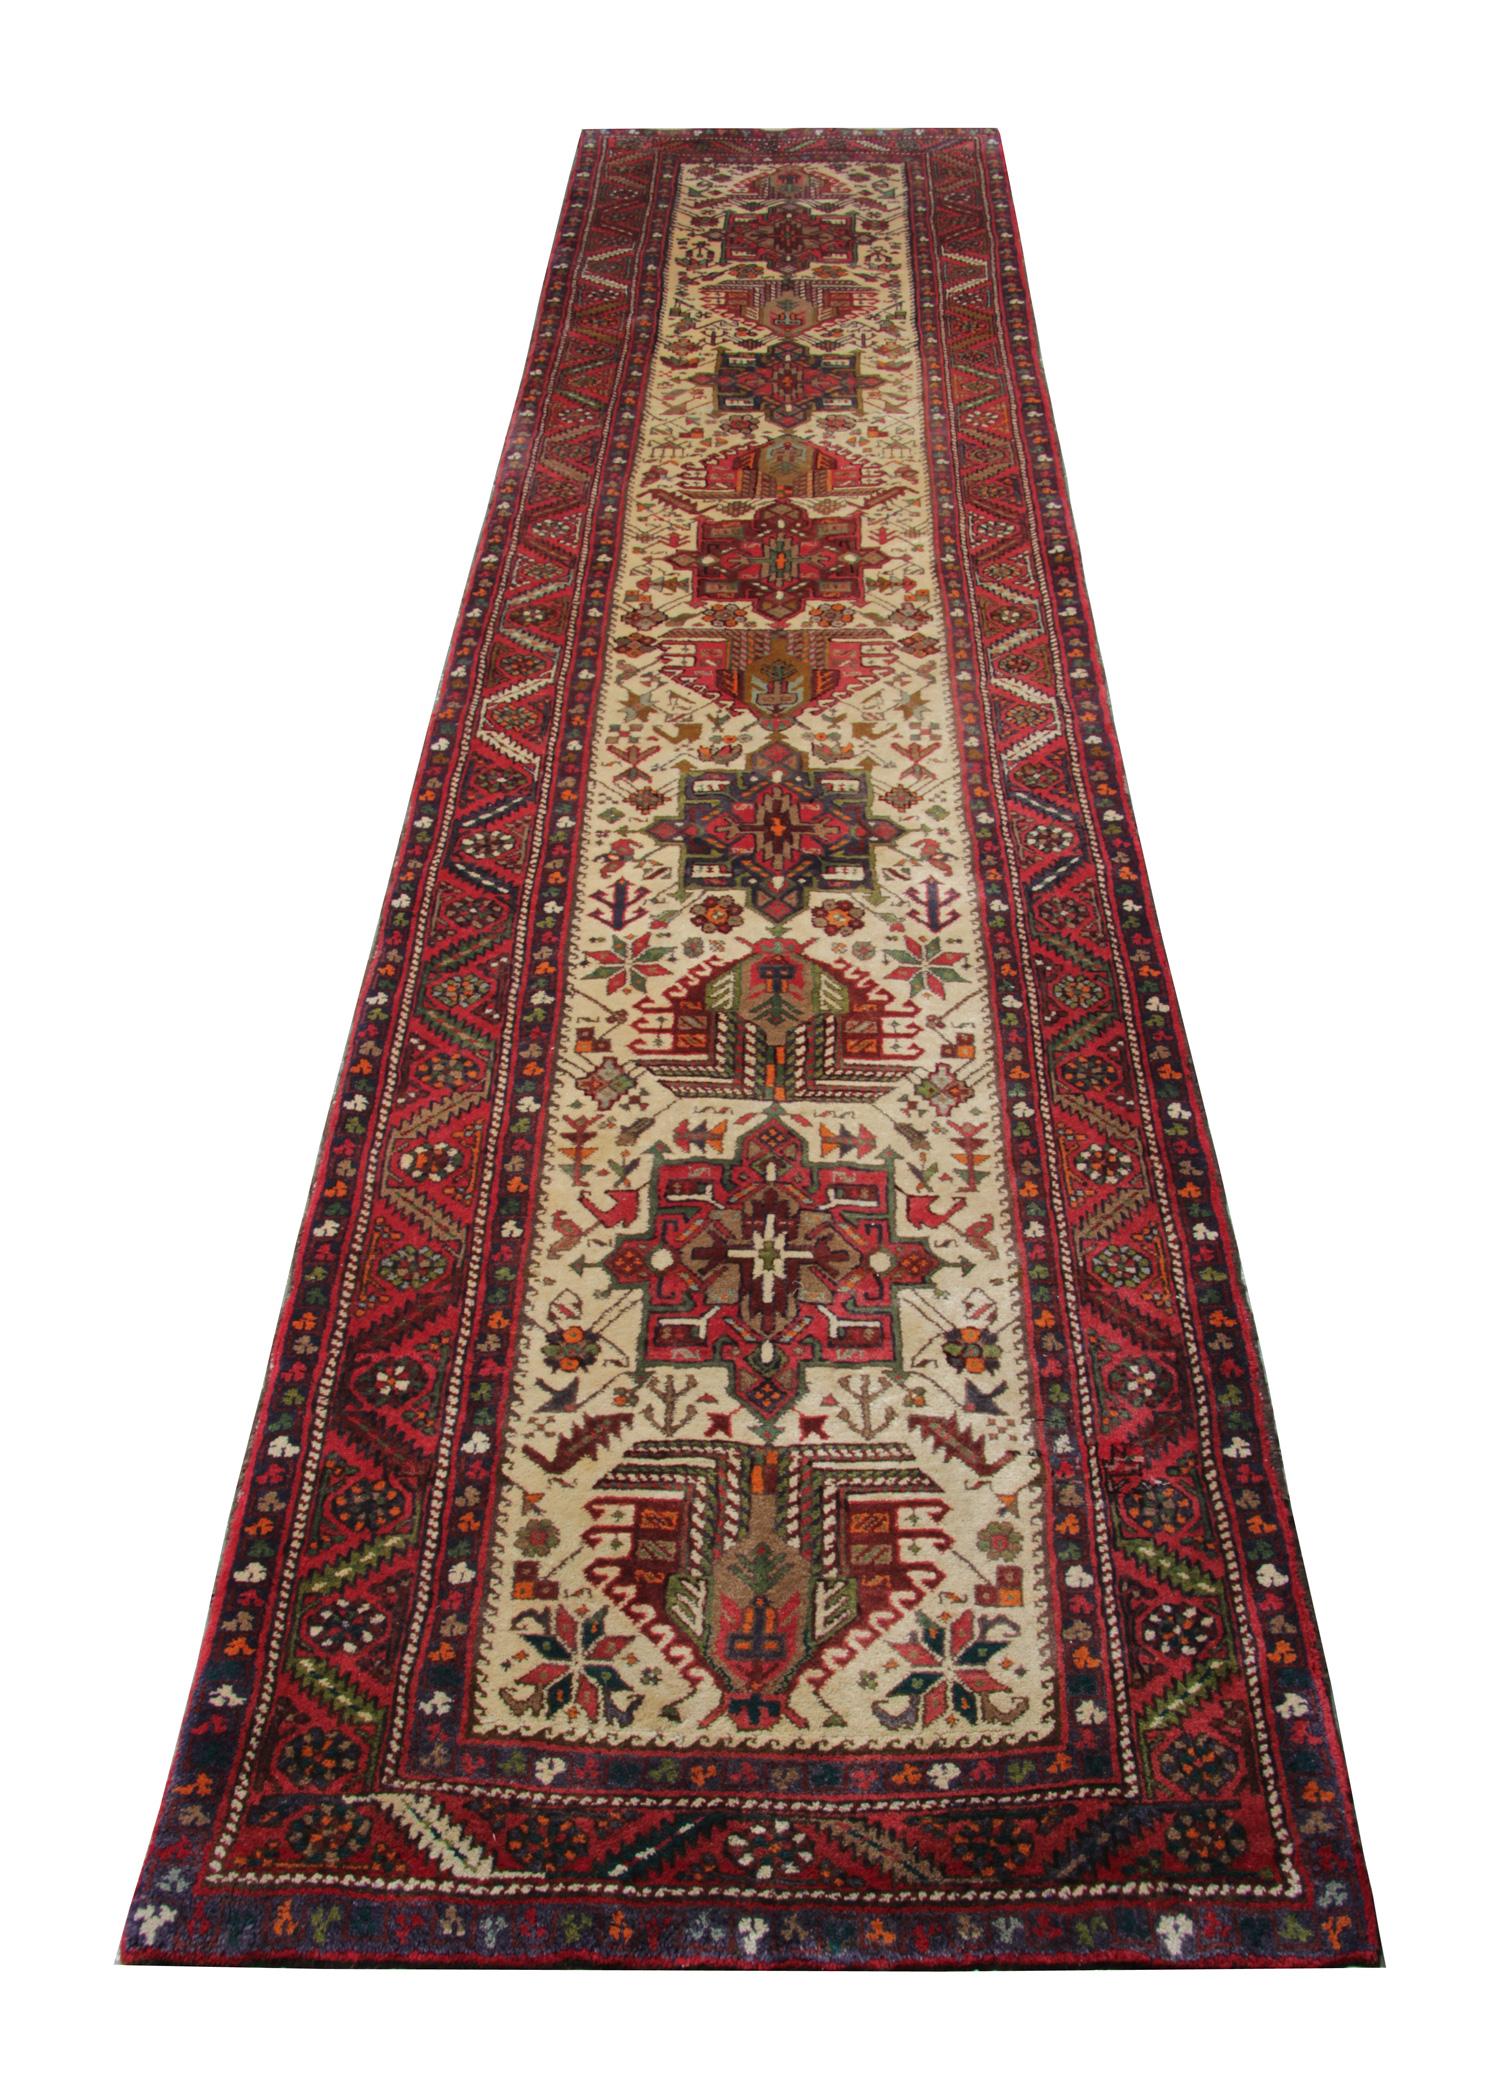 This fine vintage runner rug was woven by hand, with a traditional tribal medallion design that runs through the centre and a highly detailed geometric border. The central pattern sits on a goldfield and is decorated with red, orange, grey and cream